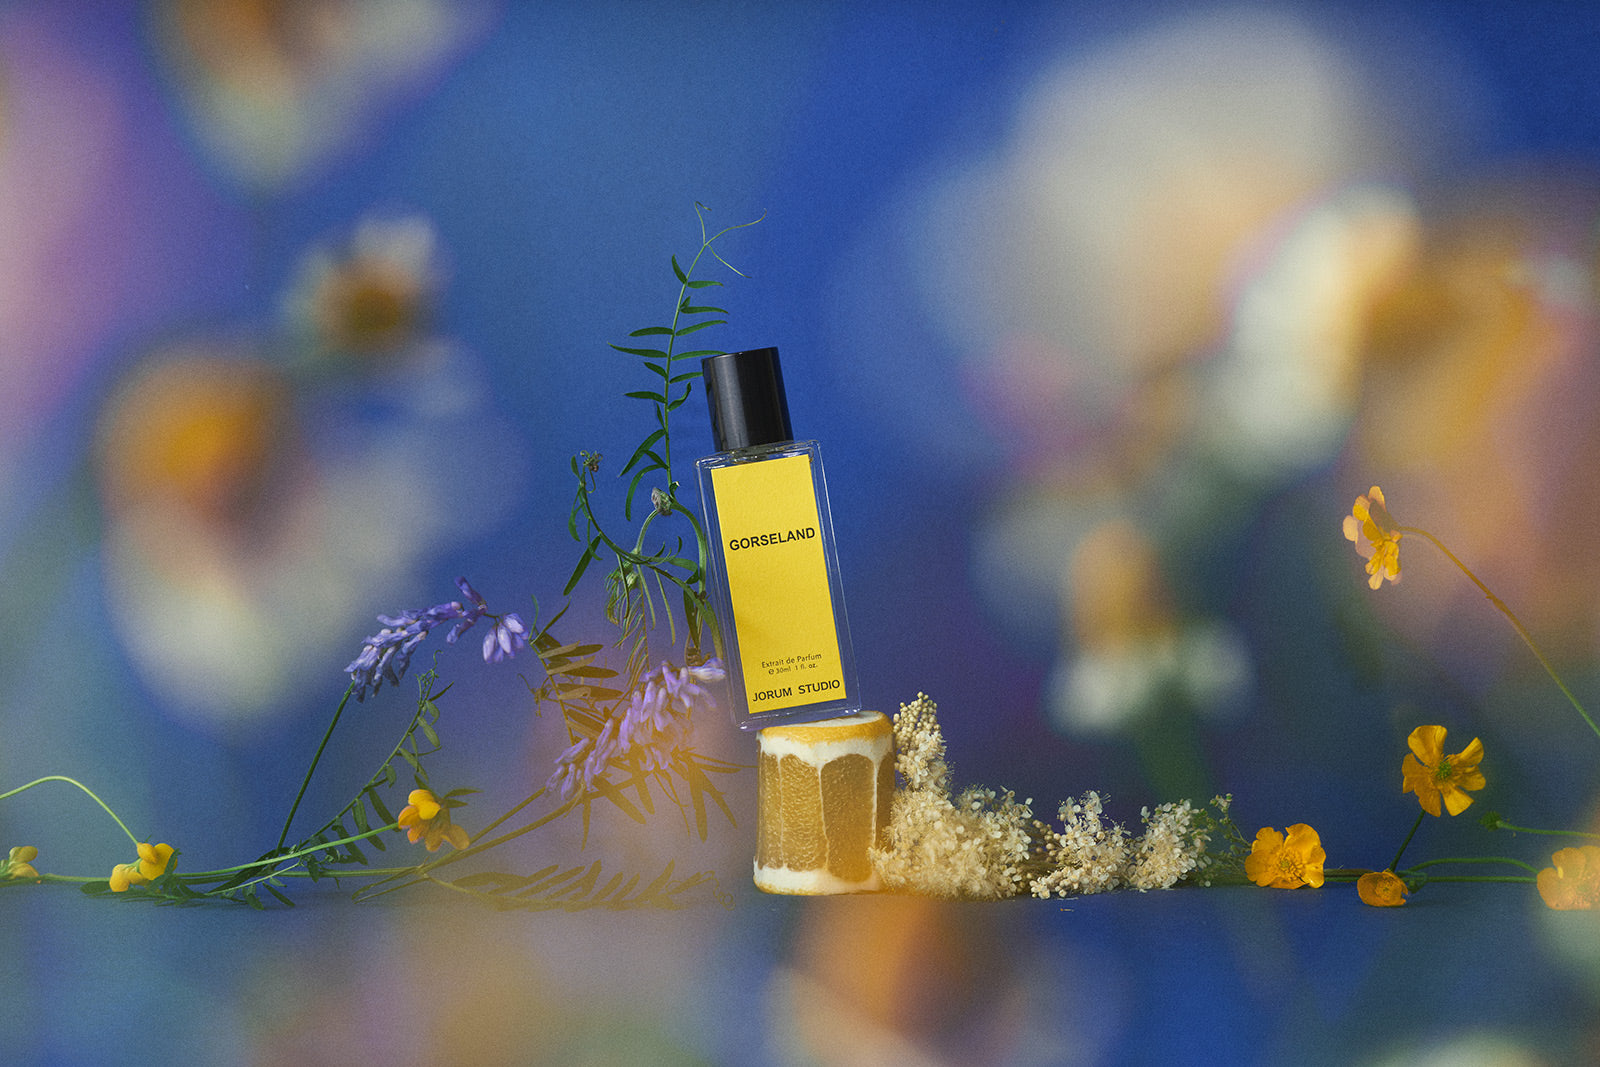 Jorum Studio Gorseland perfume with yellow label arranged on a lemon slice with wildflowers surrounding and a blue background by Gabriela Silveira